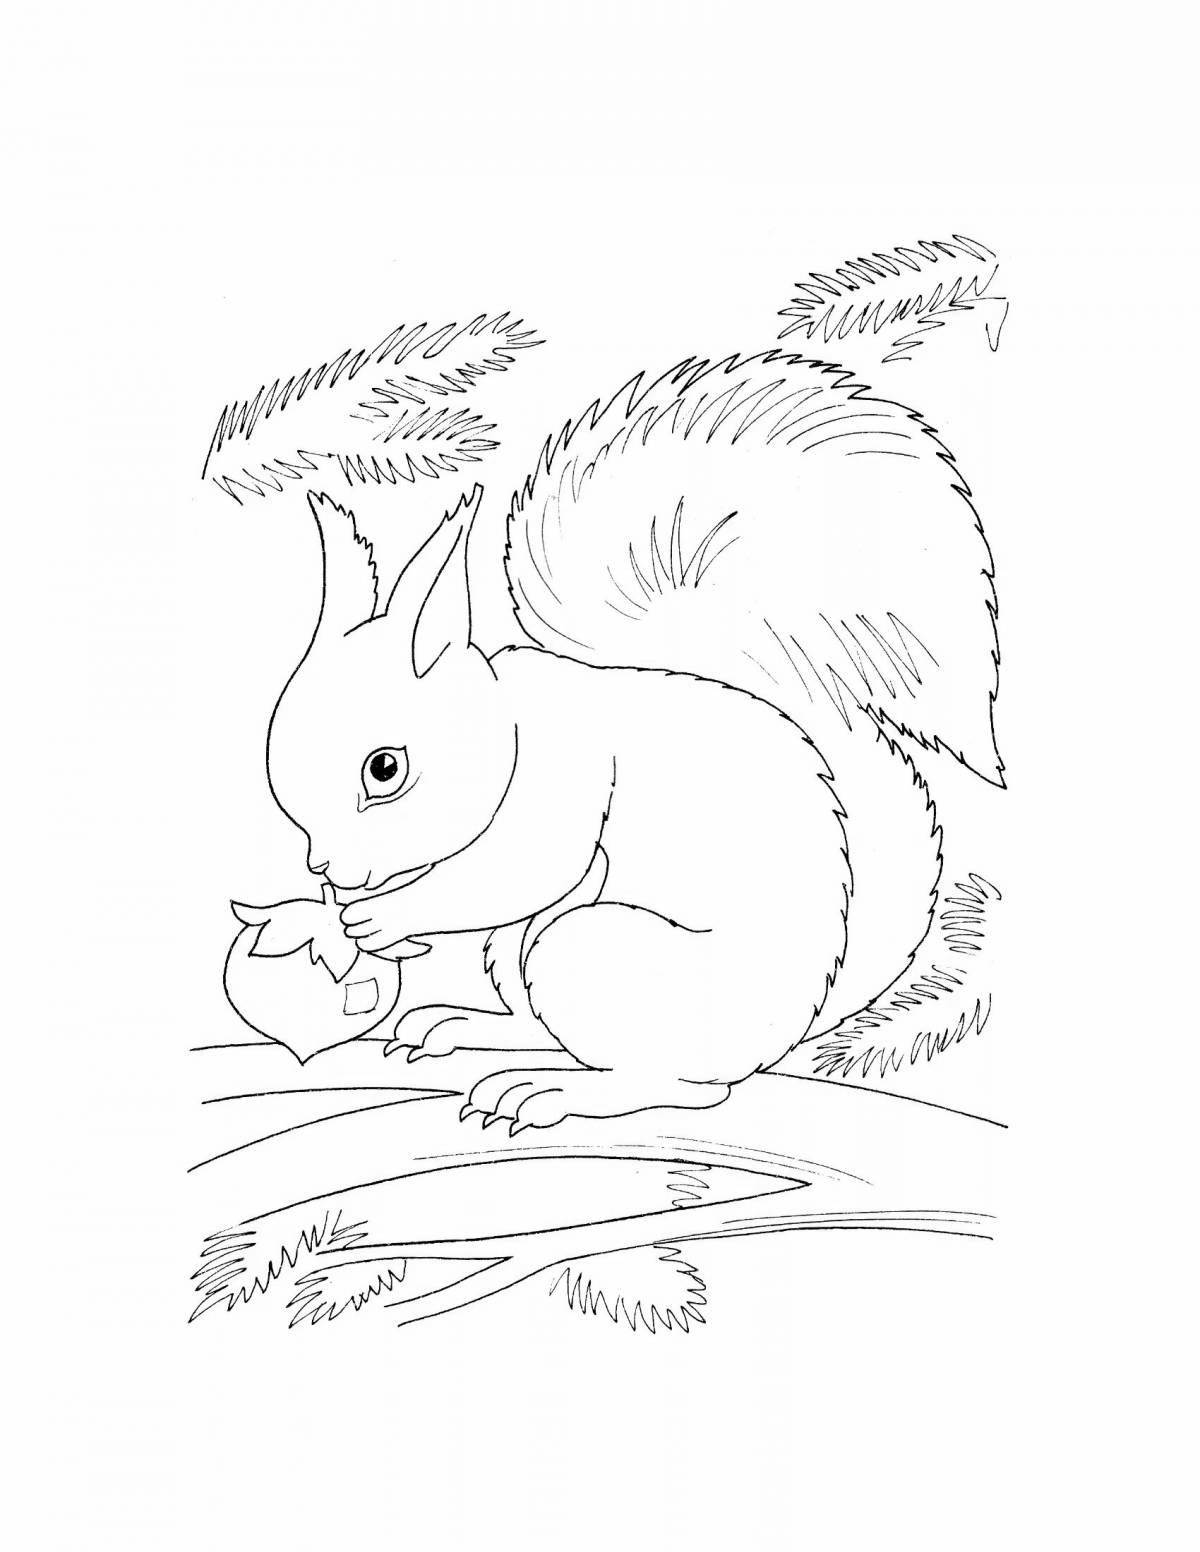 Energetic coloring of a squirrel with nuts